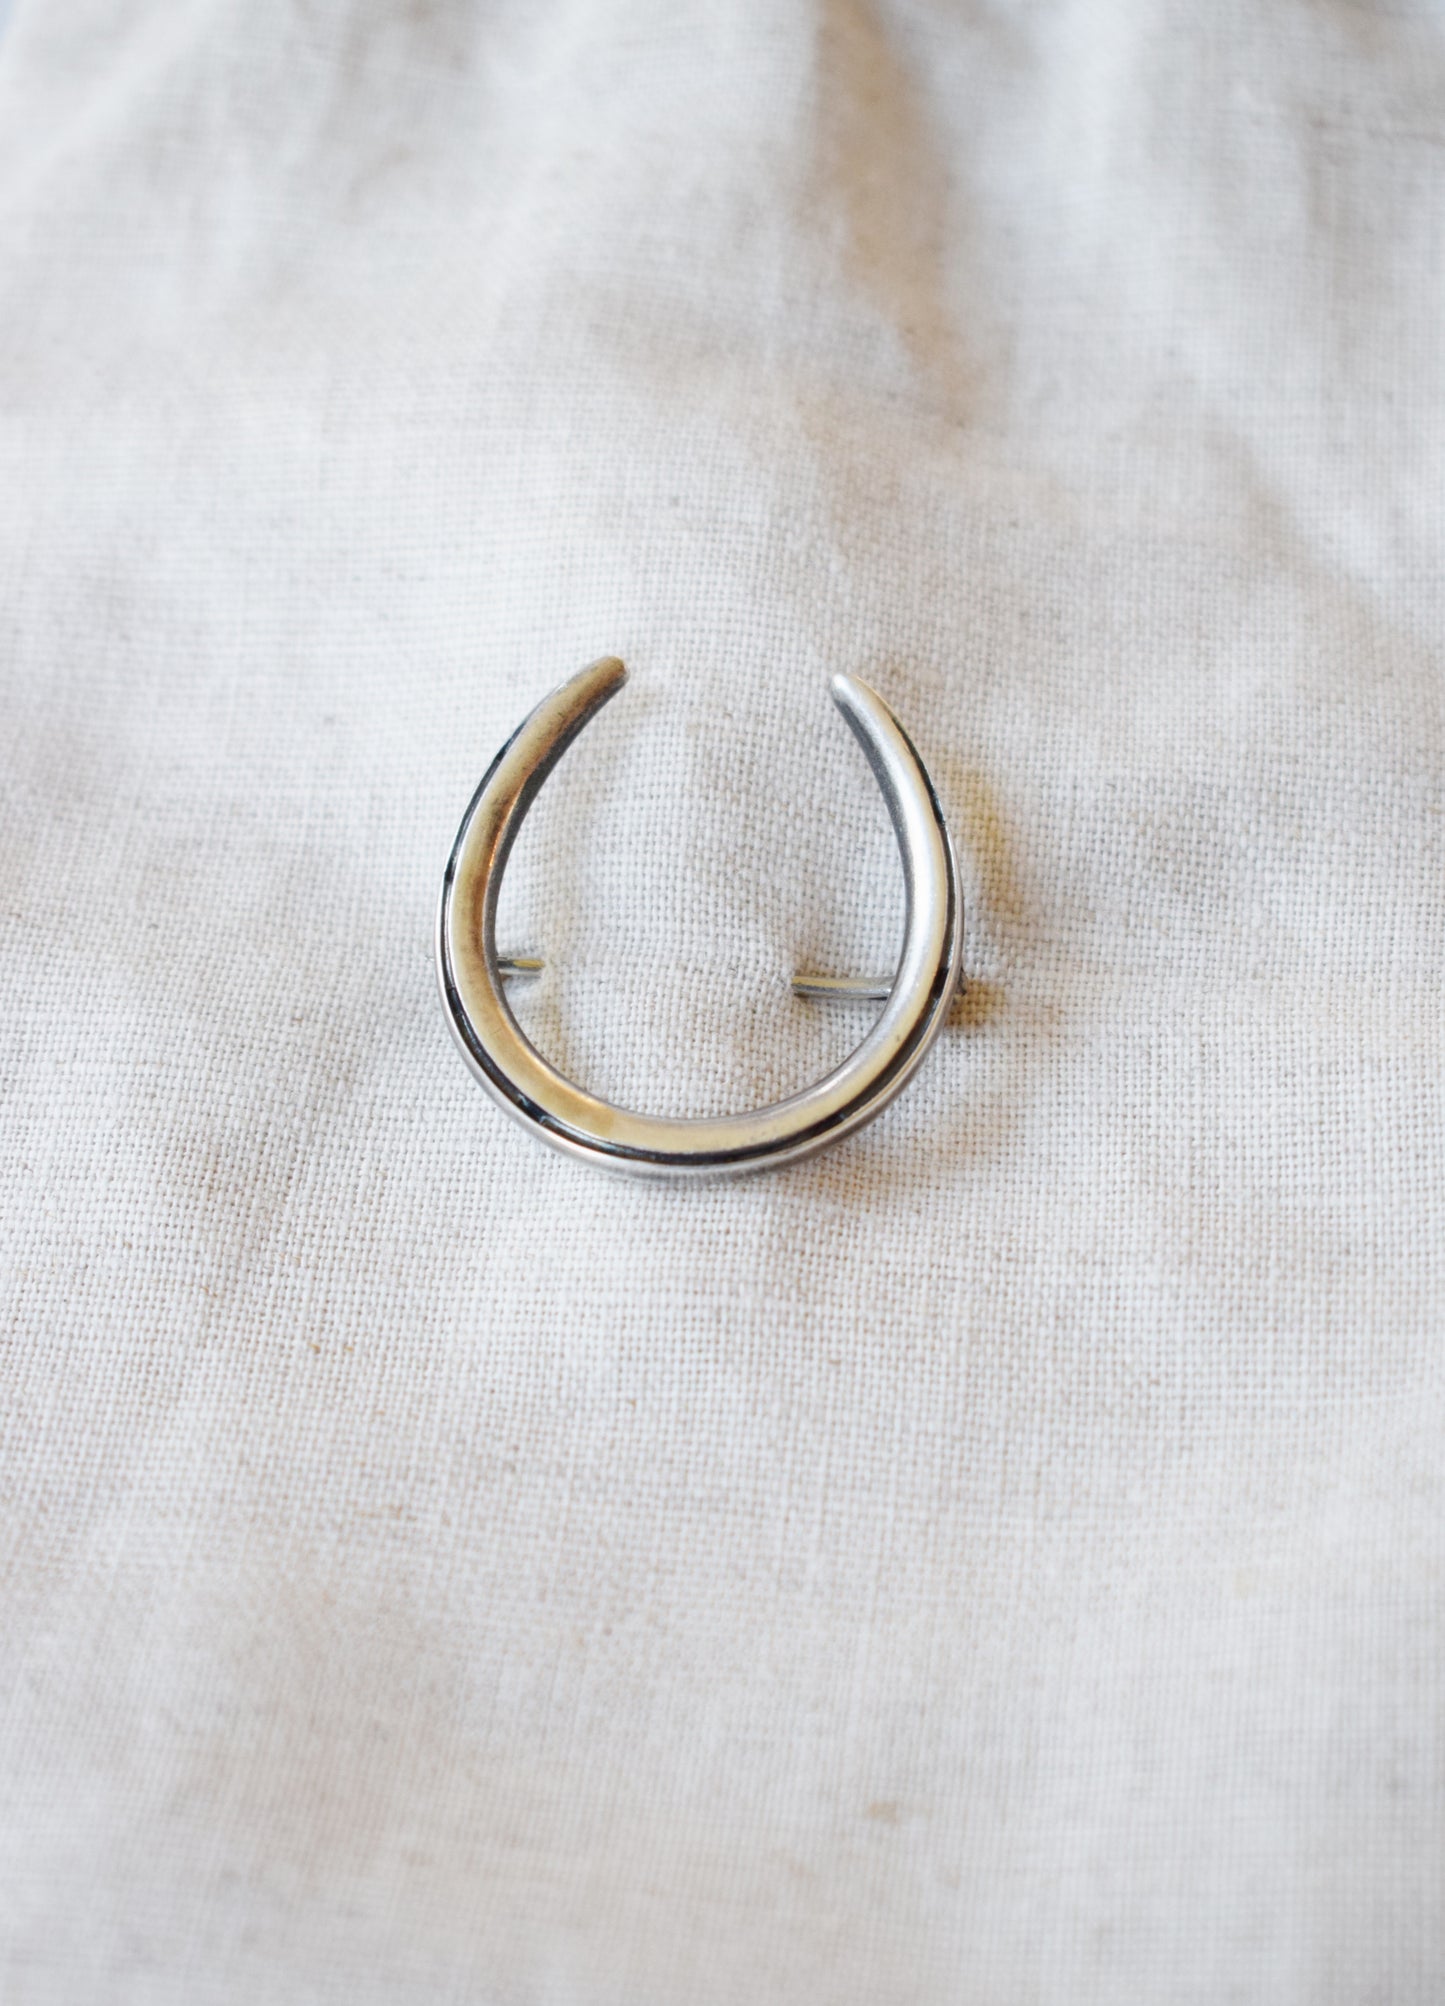 Antique Sterling Silver Lucky Horseshoe Pin